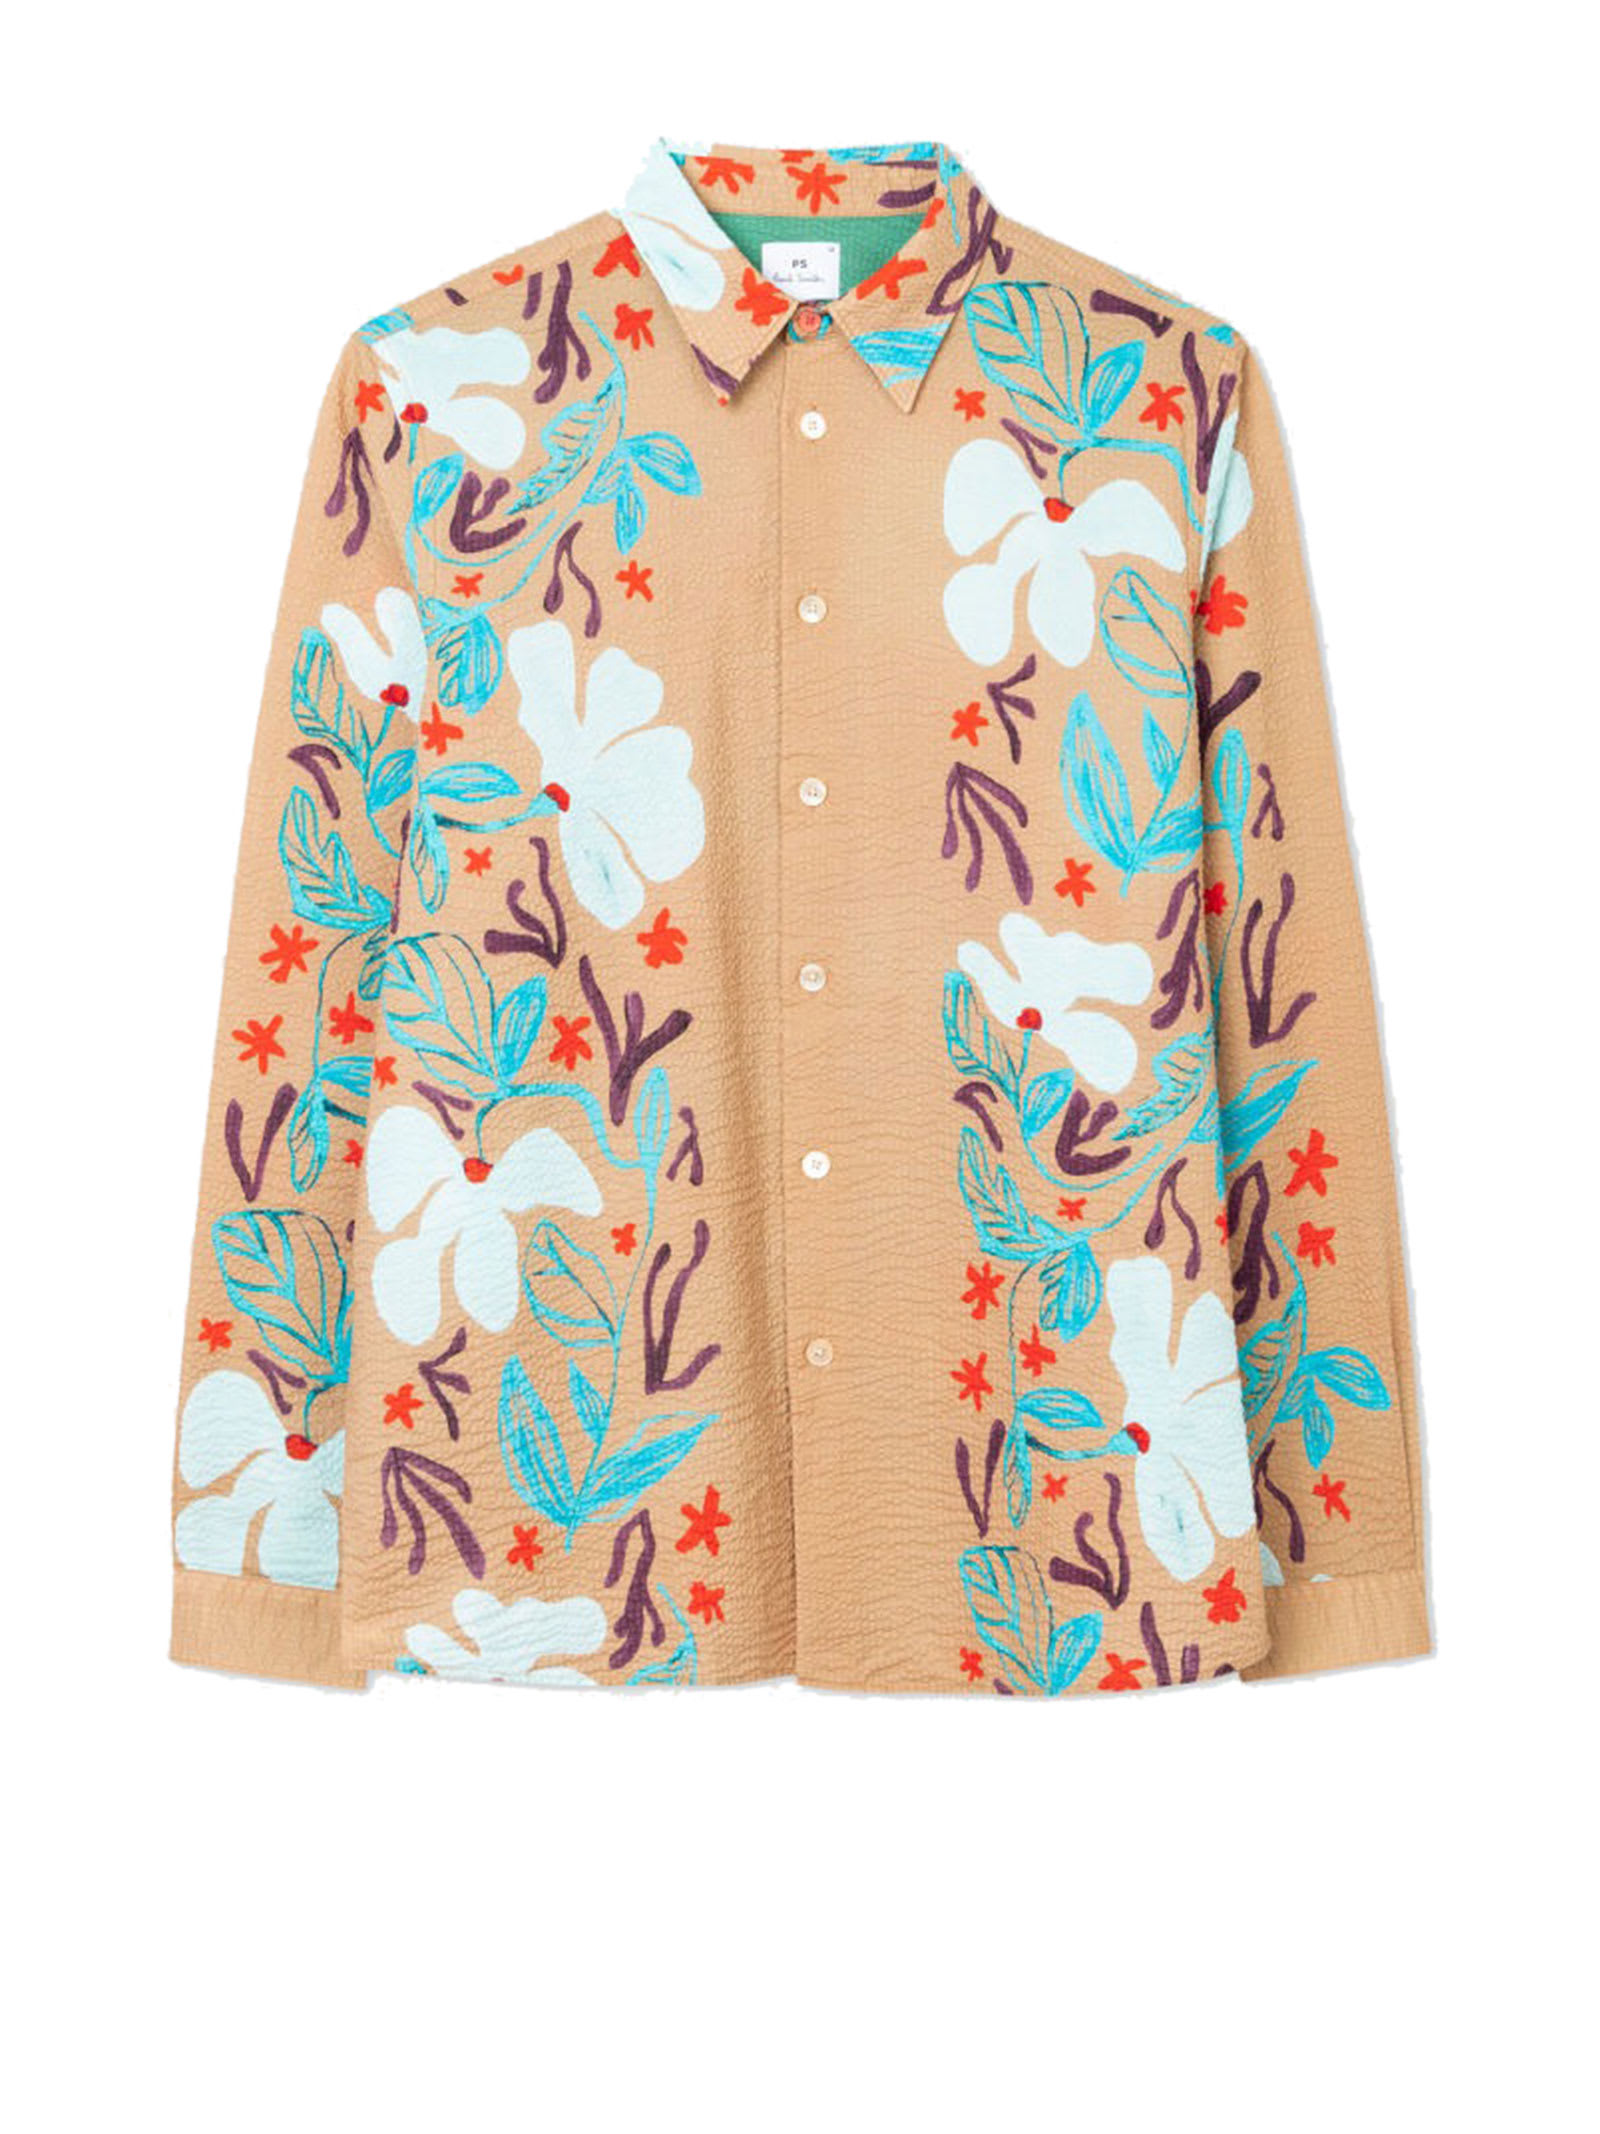 PS BY PAUL SMITH FLORAL PRINT SHIRT